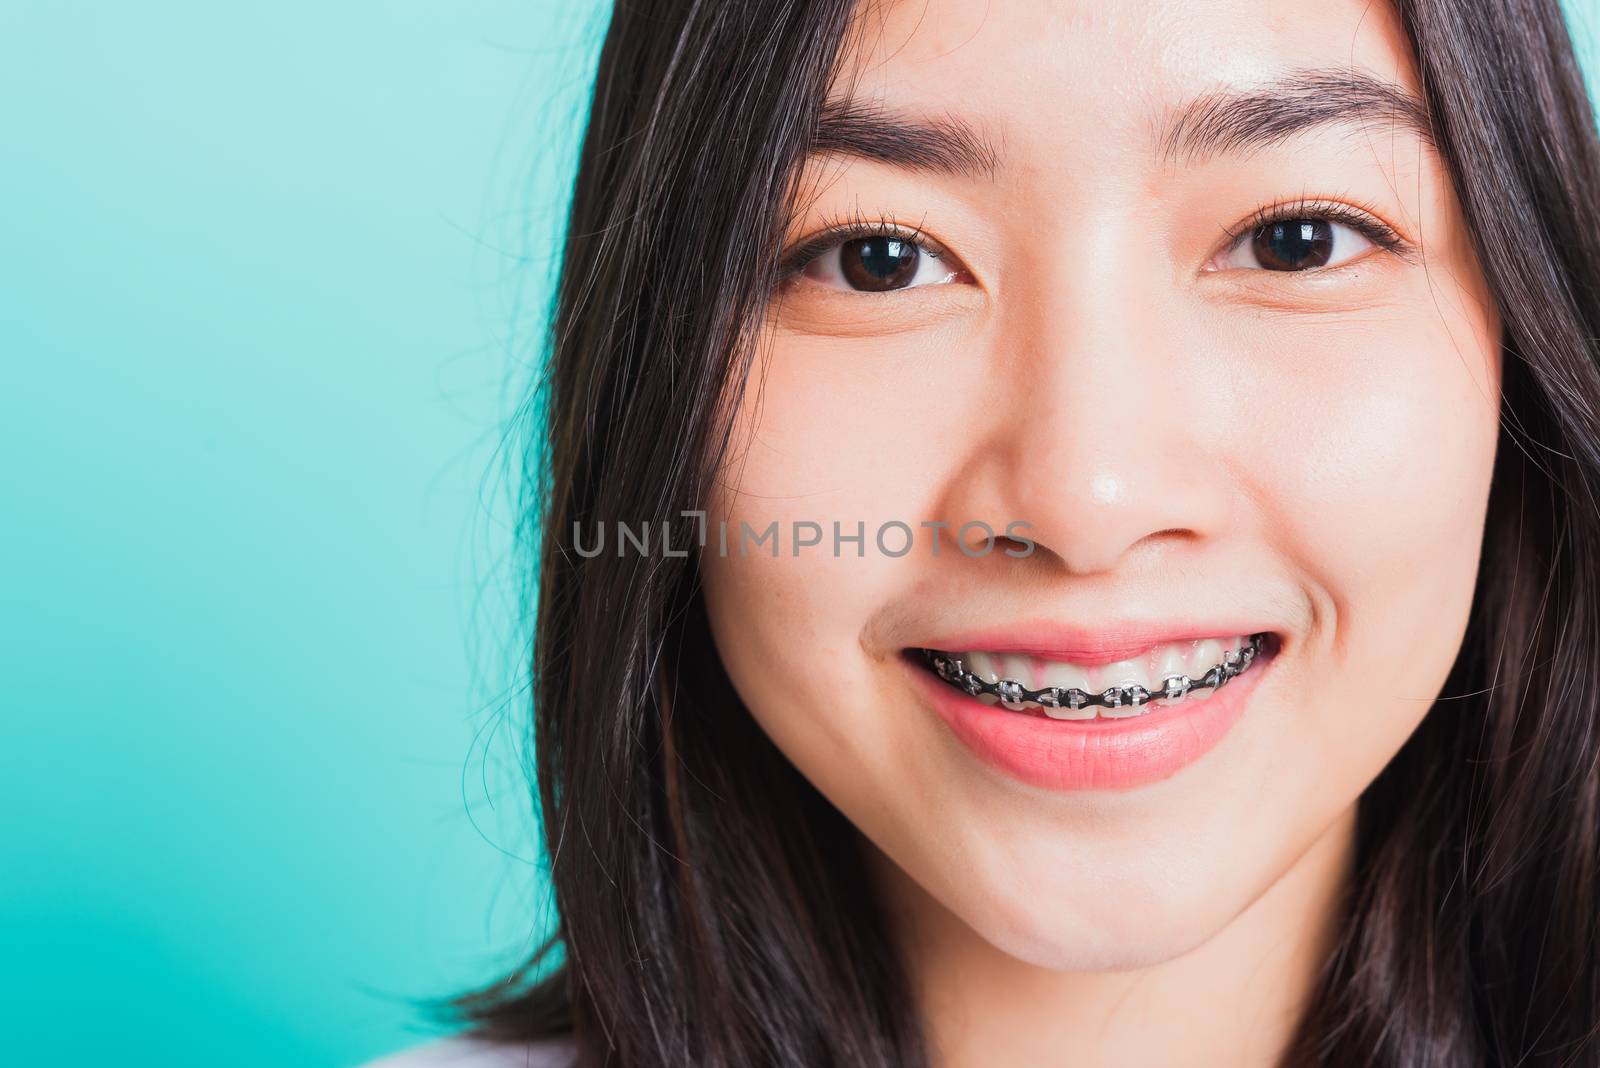 Closeup teen Asian beautiful young woman smile have dental braces on teeth laughing, studio shot isolated on a blue background, medicine and dentistry female mouth concept